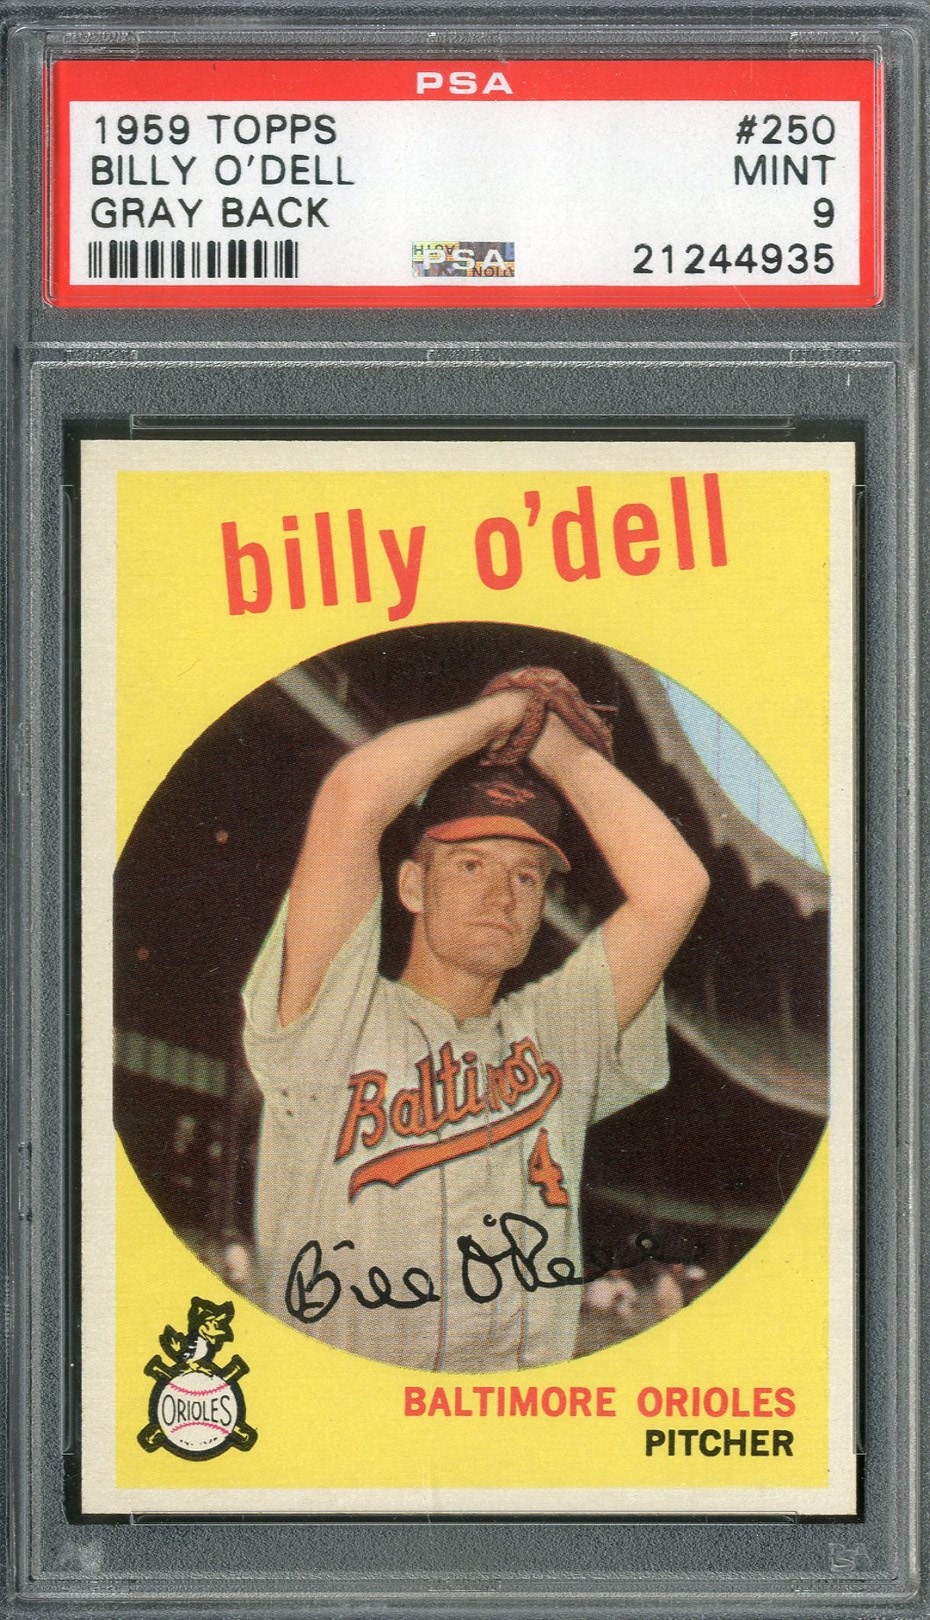 Baseball and Trading Cards - 1959 Topps #250 Billy O'Dell Gray Back PSA MINT 9 (Pop 3)